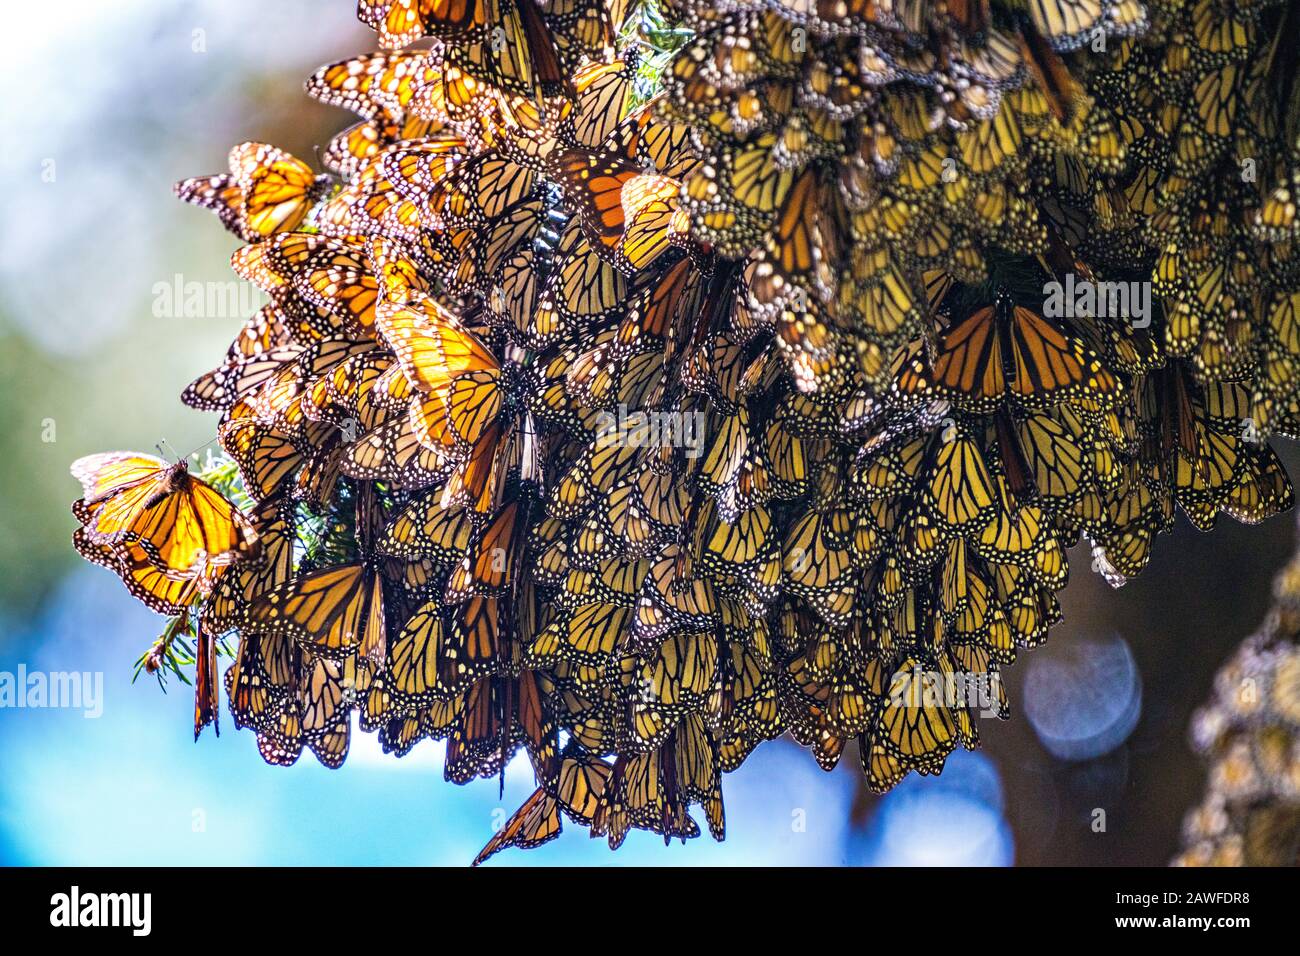 Monarch butterflies mass together as they over-winter in the Sierra Chincua Biosphere Reserve January 20, 2020 near Angangueo, Michoacan, Mexico. The monarch butterfly migration is a phenomenon across North America, where the butterflies migrates each autumn to overwintering sites in Central Mexico. Stock Photo